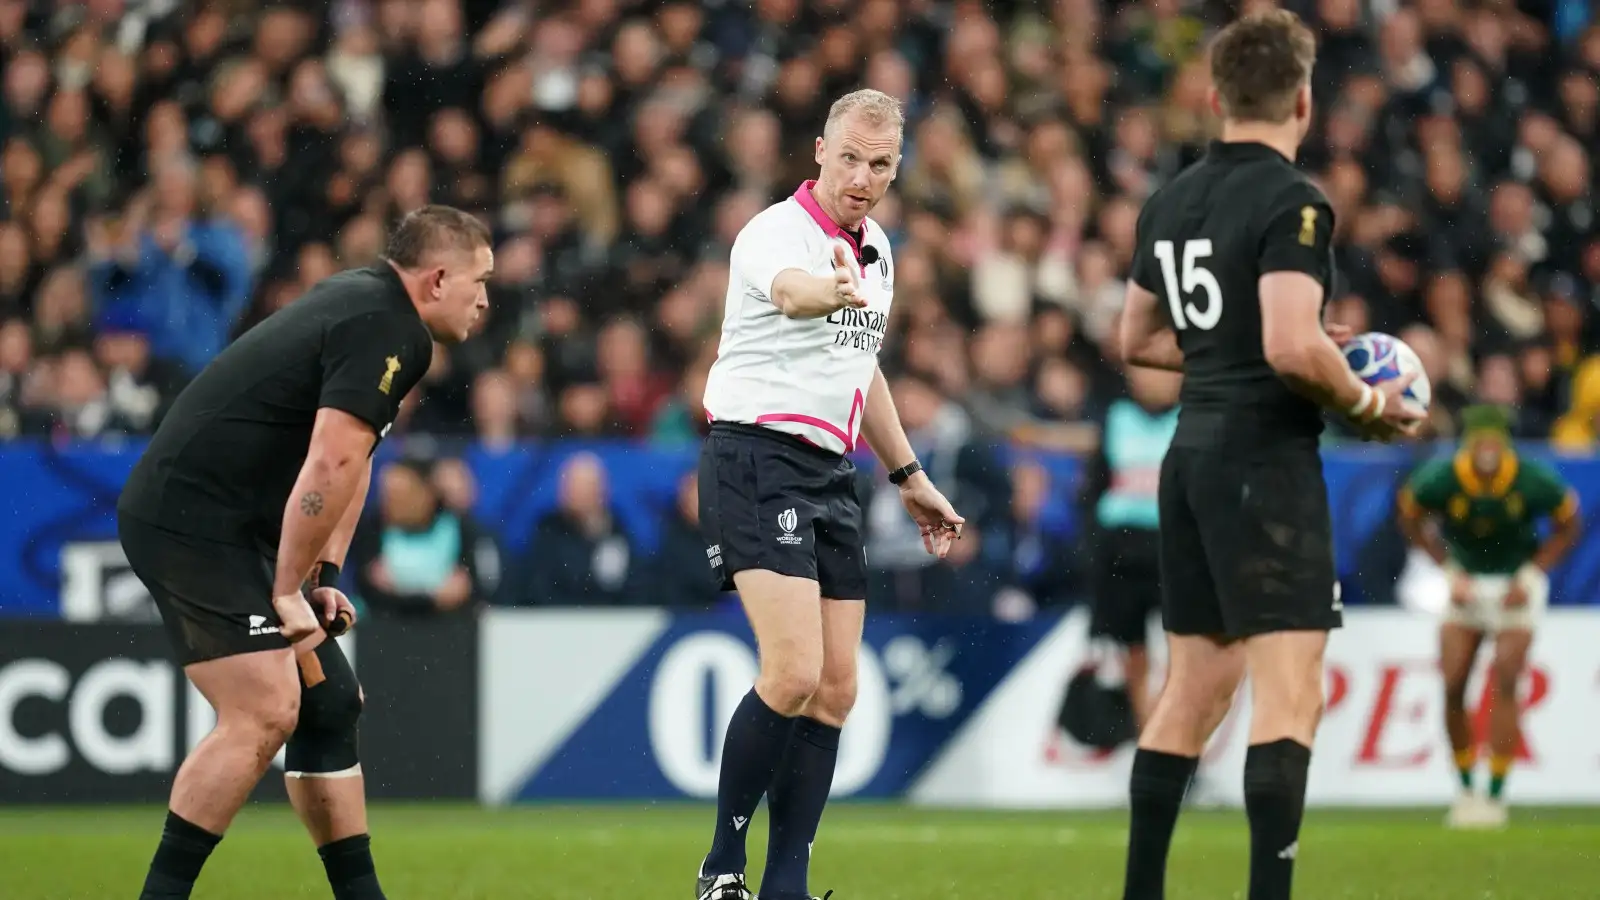 Wayne Barnes refereeing the Rugby World Cup final between All Blacks and Springboks.